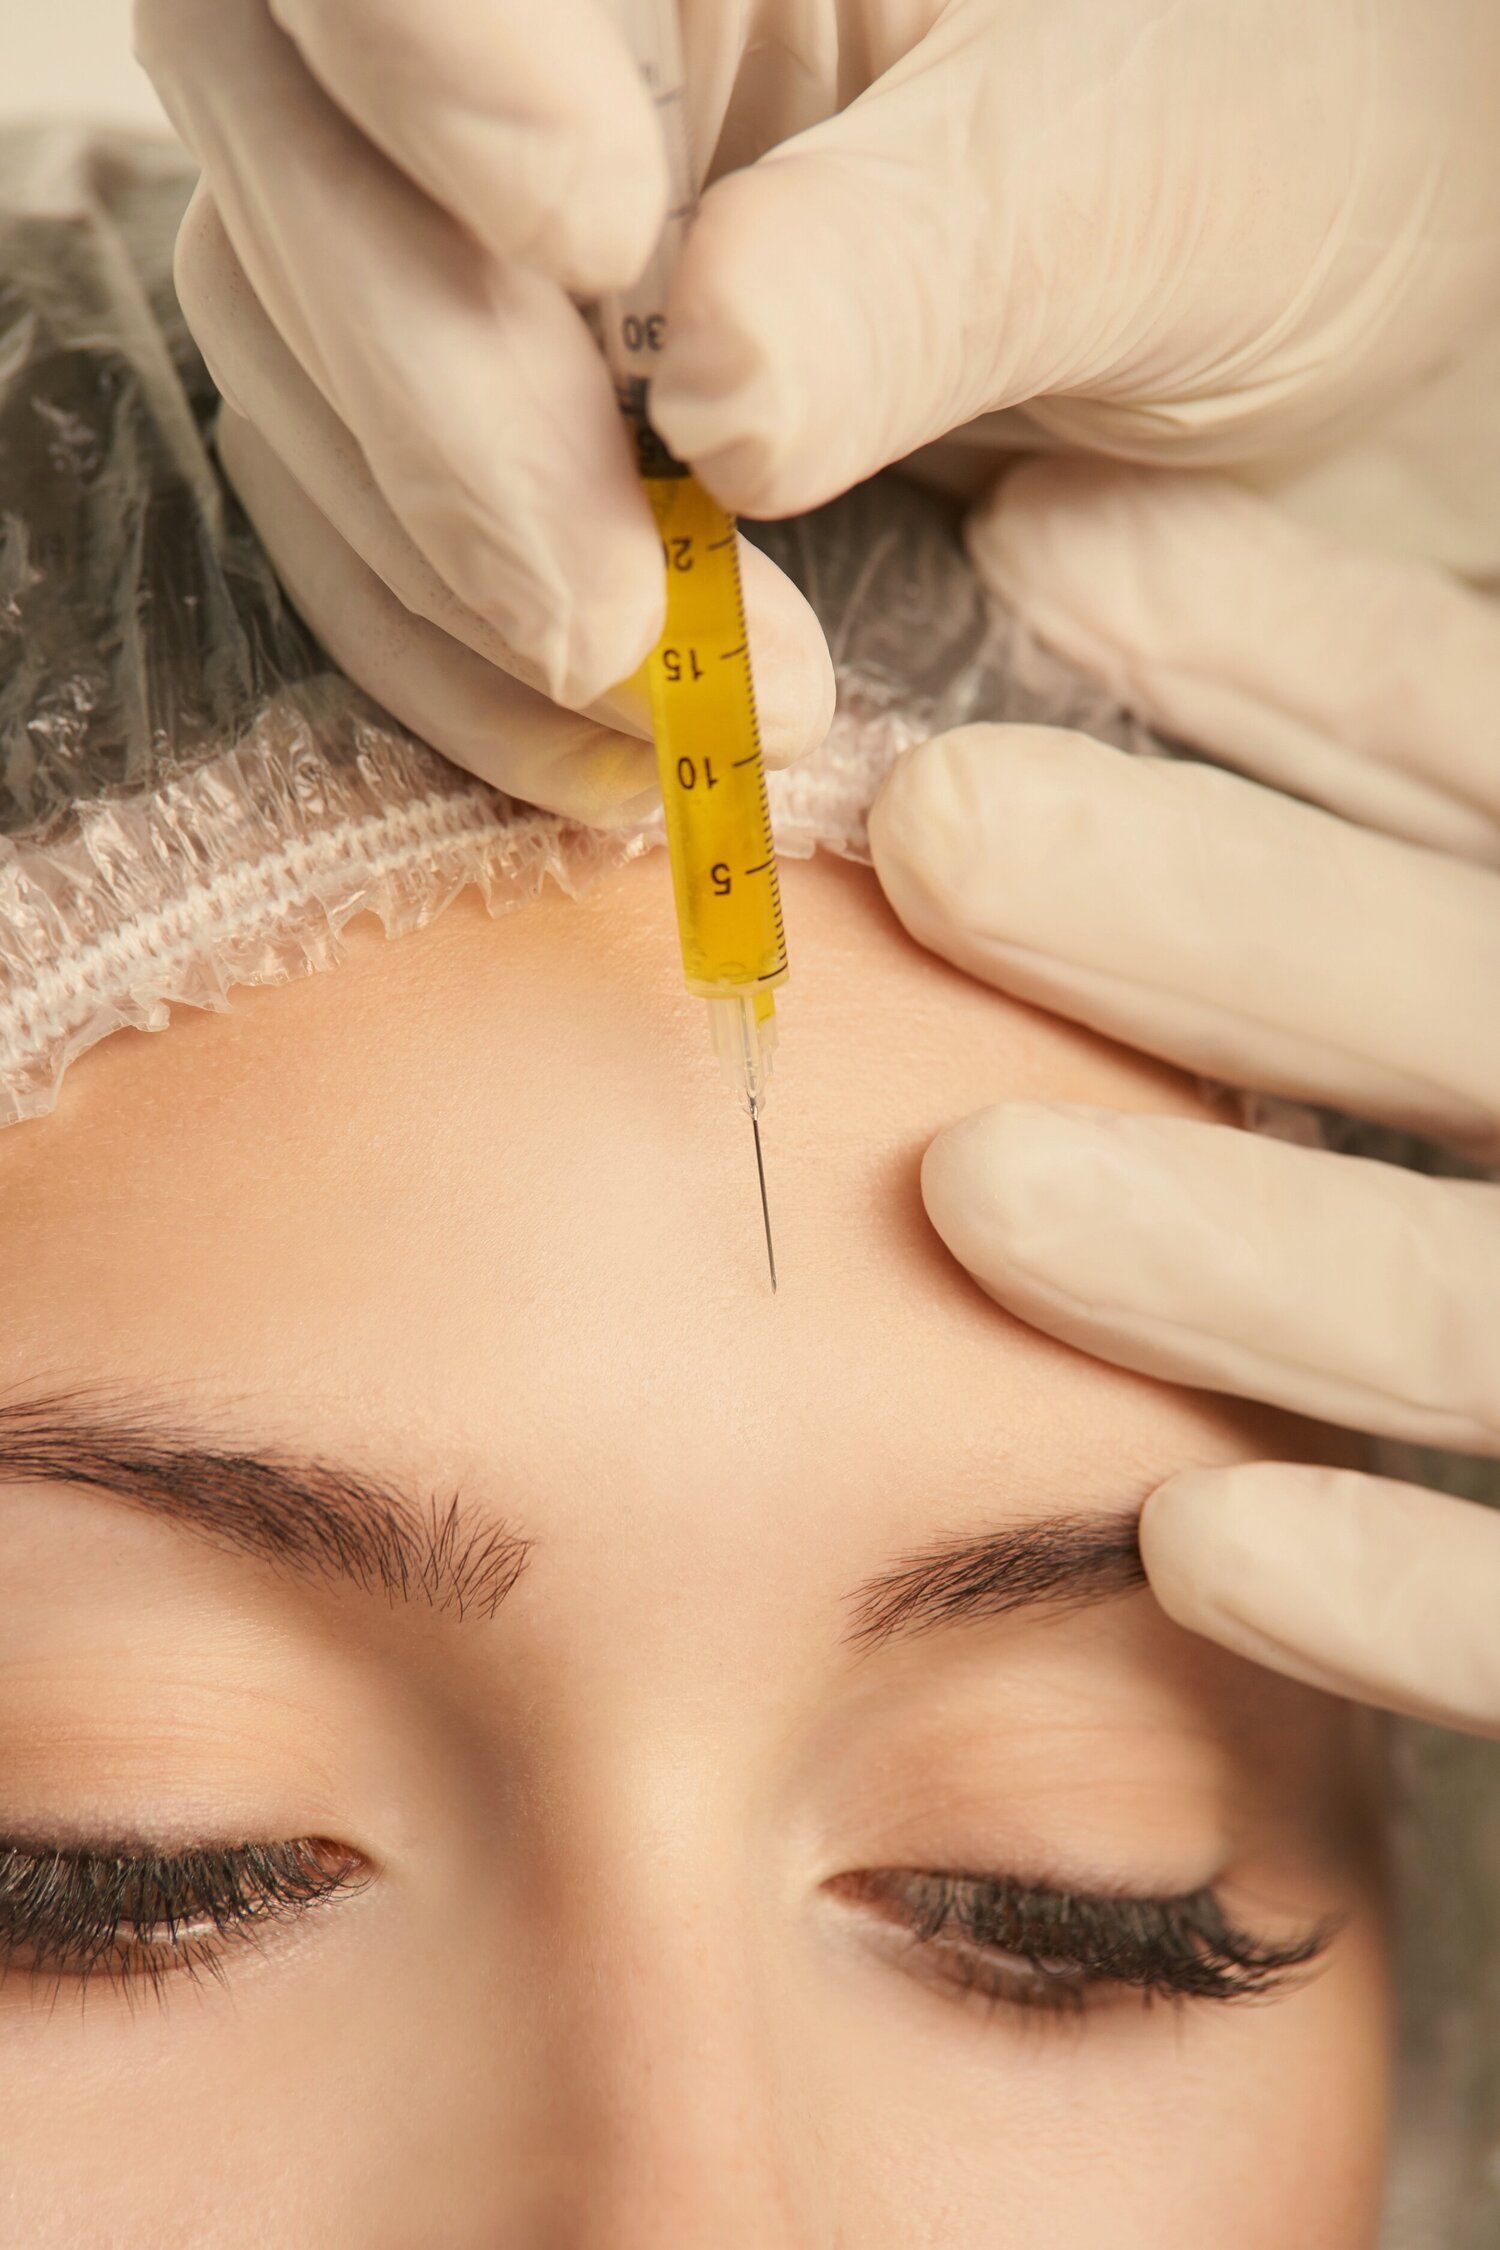 woman holding cosmetic injection needle closeup